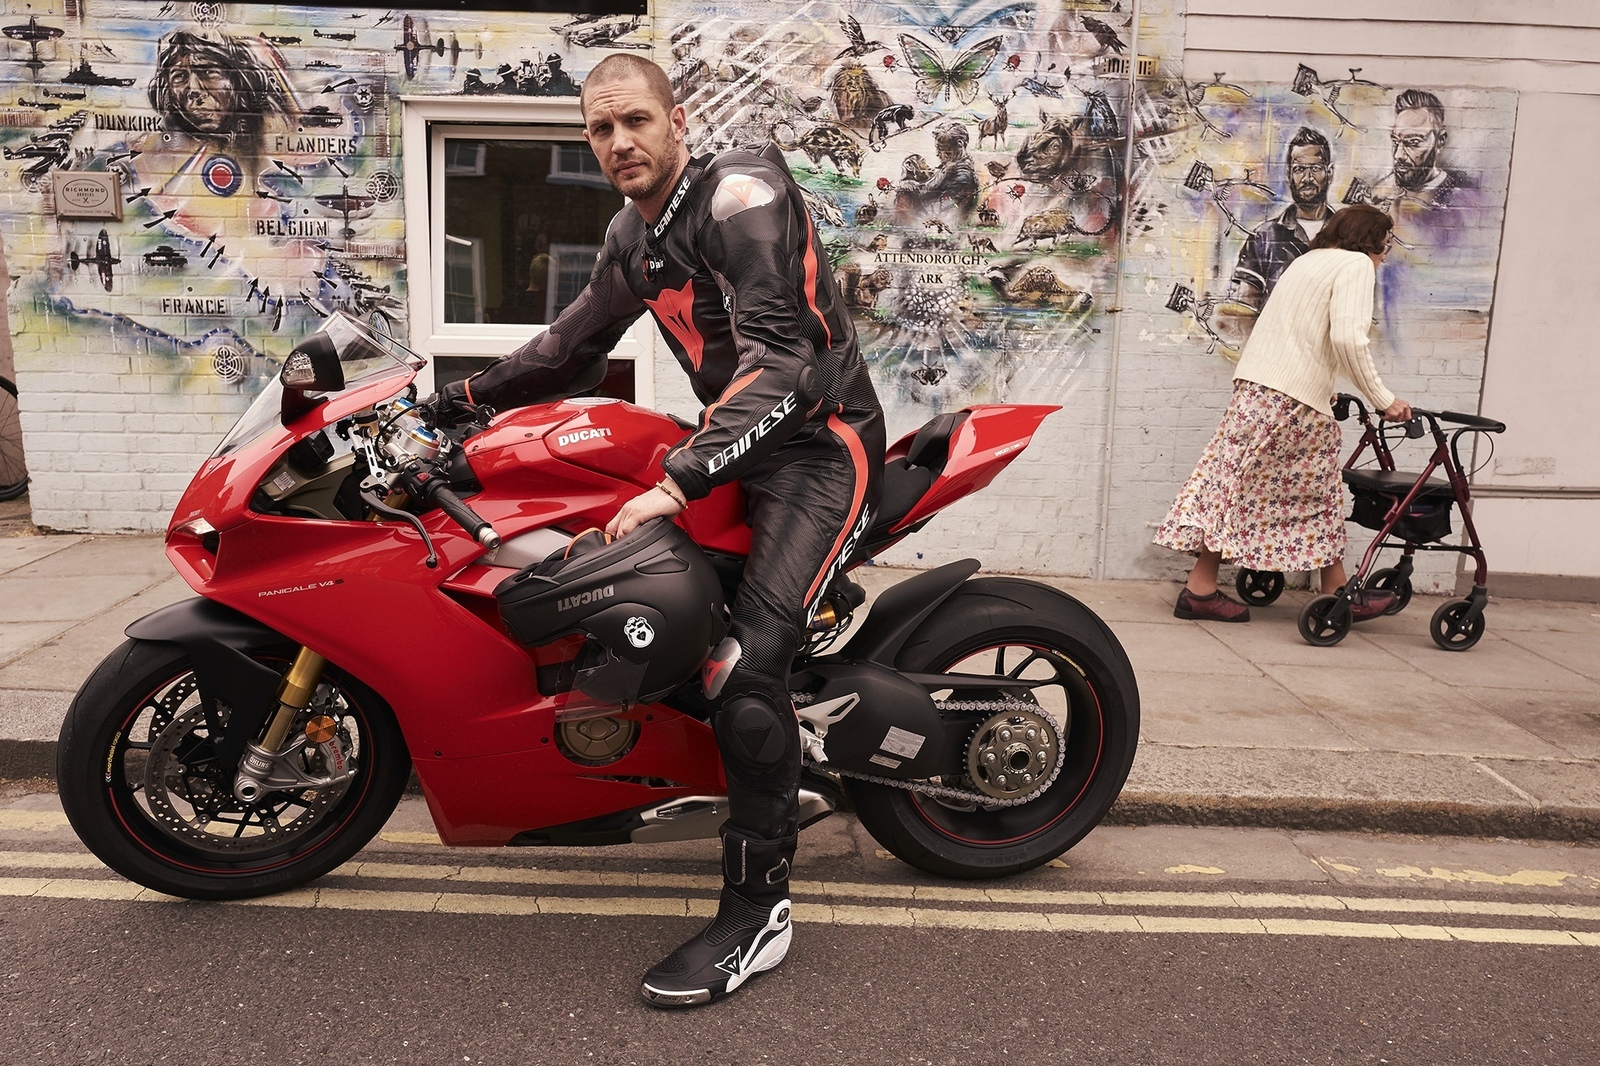 Tom Hardy in the September issue of Esquire magazine - Tom Hardy, PHOTOSESSION, Esquire, Longpost, Celebrities, Magazine, Cover, Actors and actresses